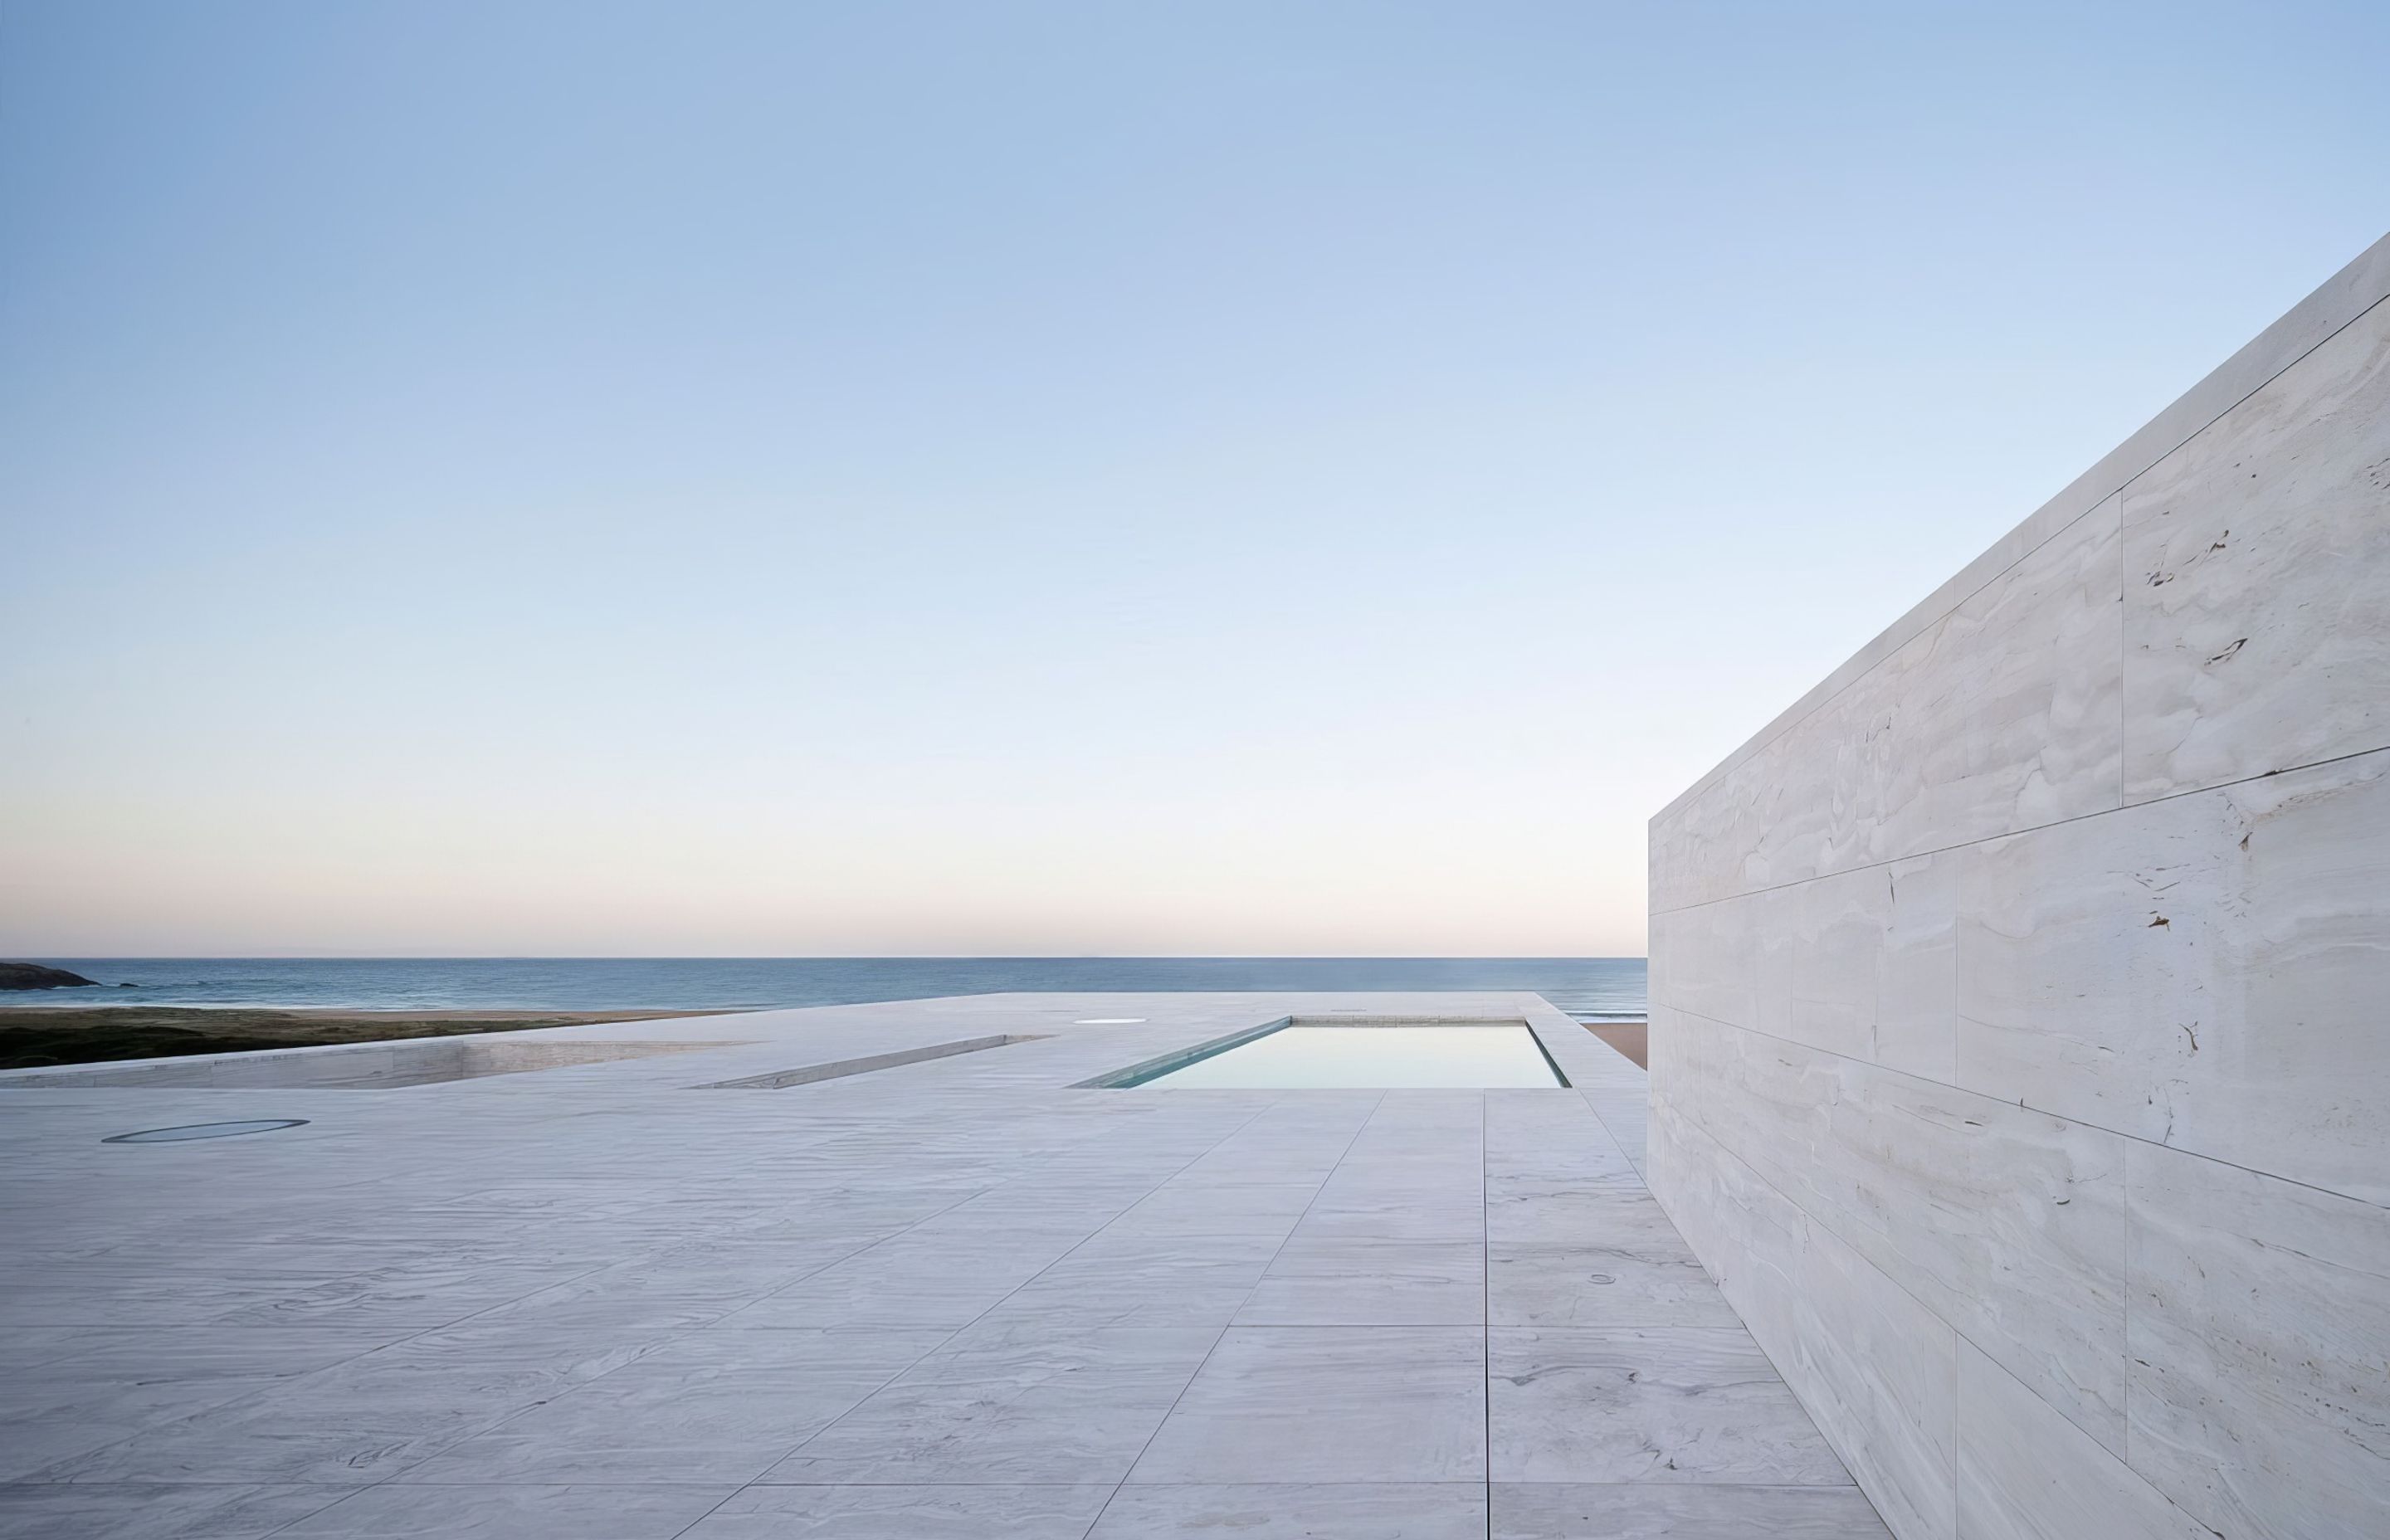 Travertine Zena at House of the Infinite by Alberto Campo Baeza in collaboration with Tomás Carranza, Javier Montero in Cádiz, Spain. Photography by Javier Callejas.